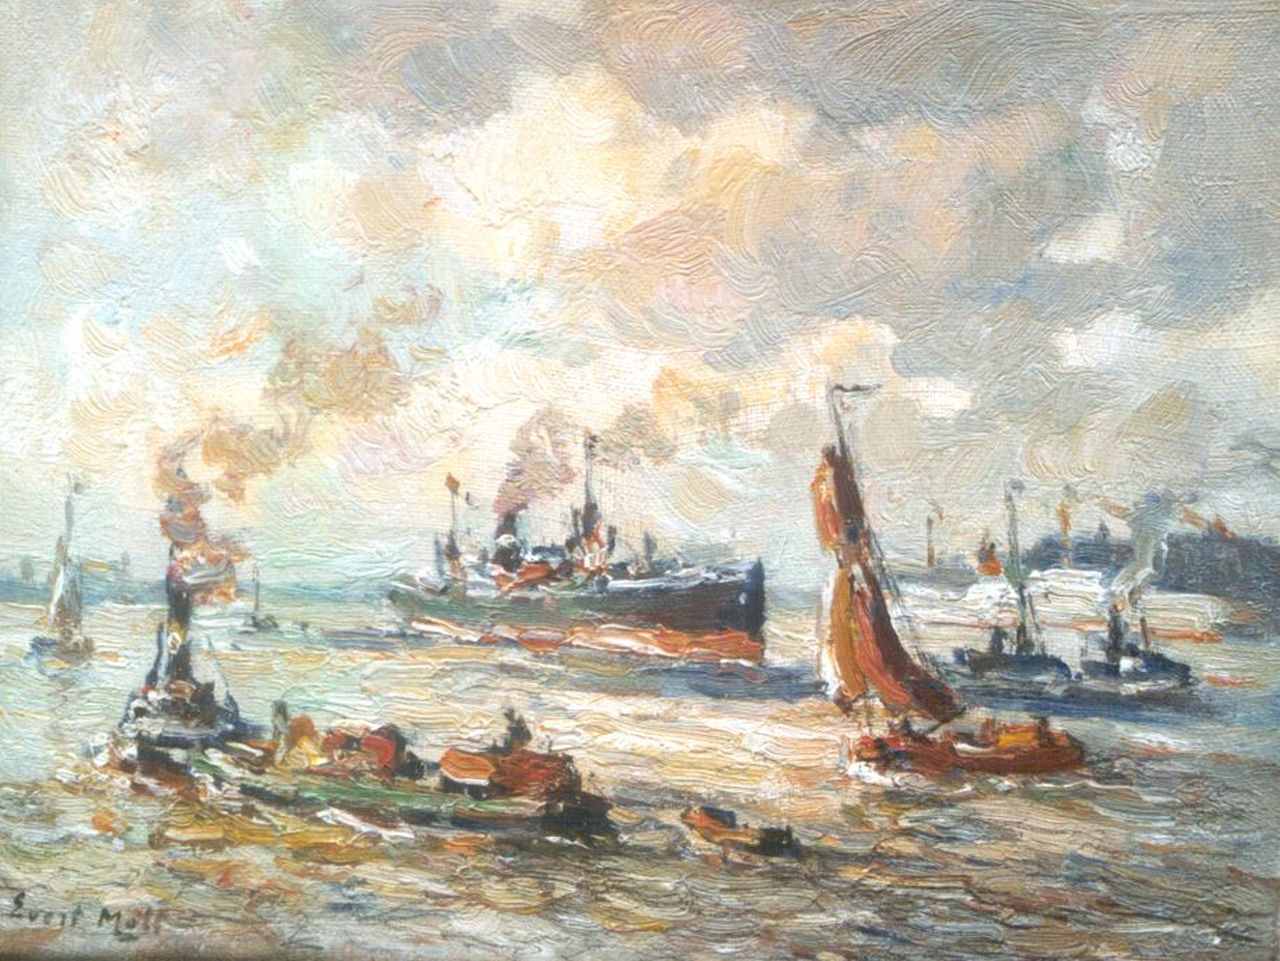 Moll E.  | Evert Moll, Ships in the harbour of Rotterdam, Öl auf Leinwand 19,3 x 25,4 cm, signed l.l.